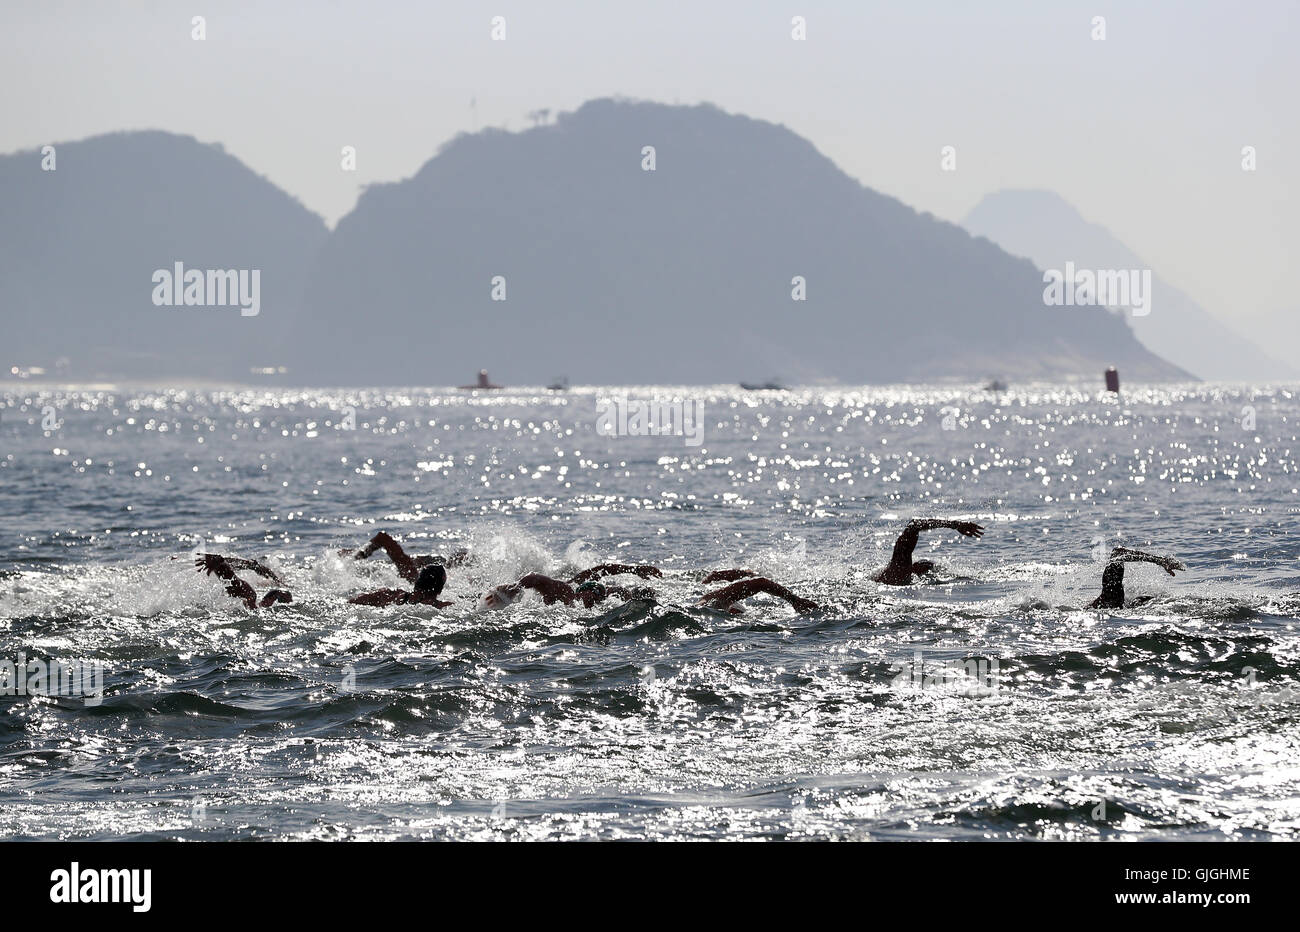 A view of competitors during the mens 10km marathon swimming at Fort Copacabana on the eleventh day of the Rio Olympic Games, Brazil. Stock Photo